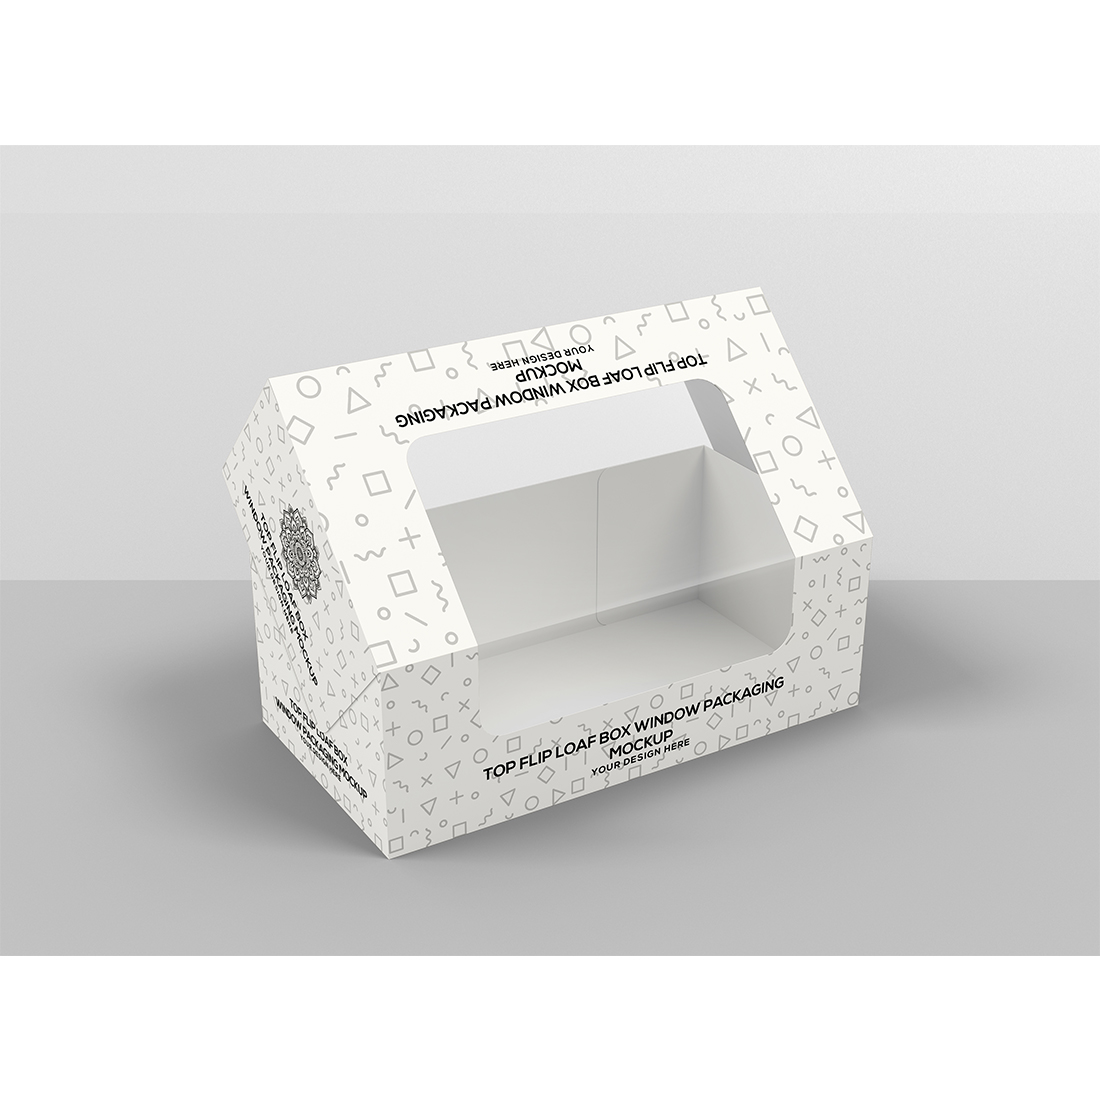 Top Flip Loaf Box with Window Packaging Mockup cover image.